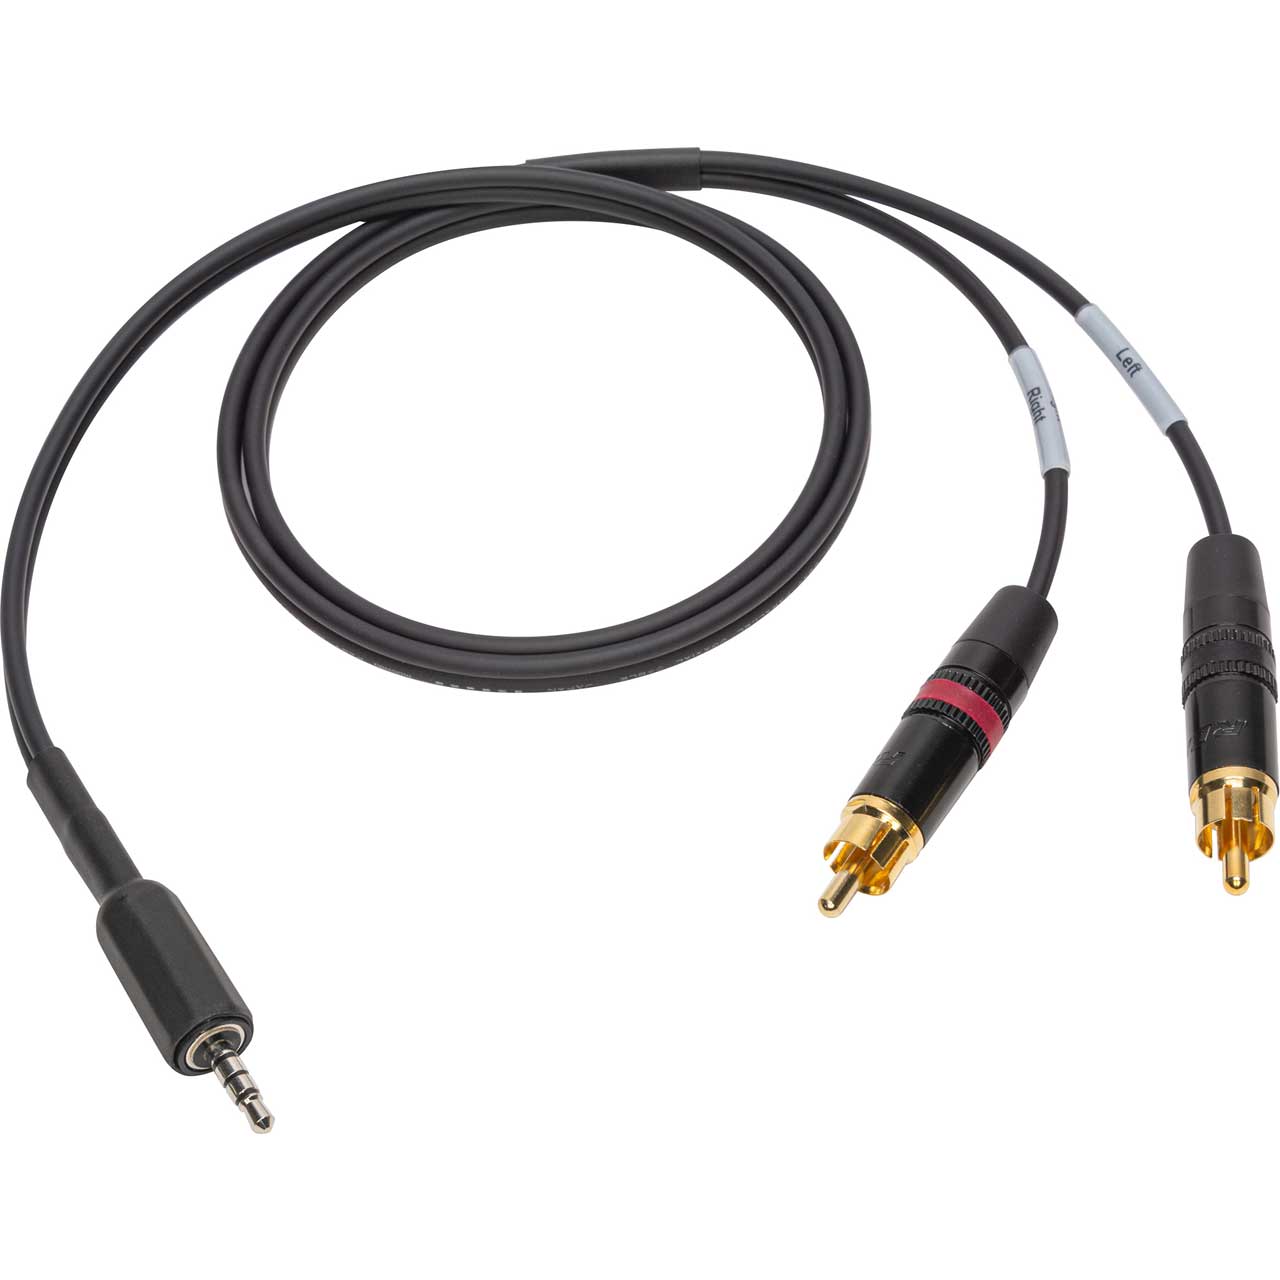 Hej hej Blive skør Skulle Sescom SES-LSUMRCA iPod/iPad Summing Cable Dual RCA Male to 3.5mm TRRS Male  for Apple Lightning Adapter - 3 Foot